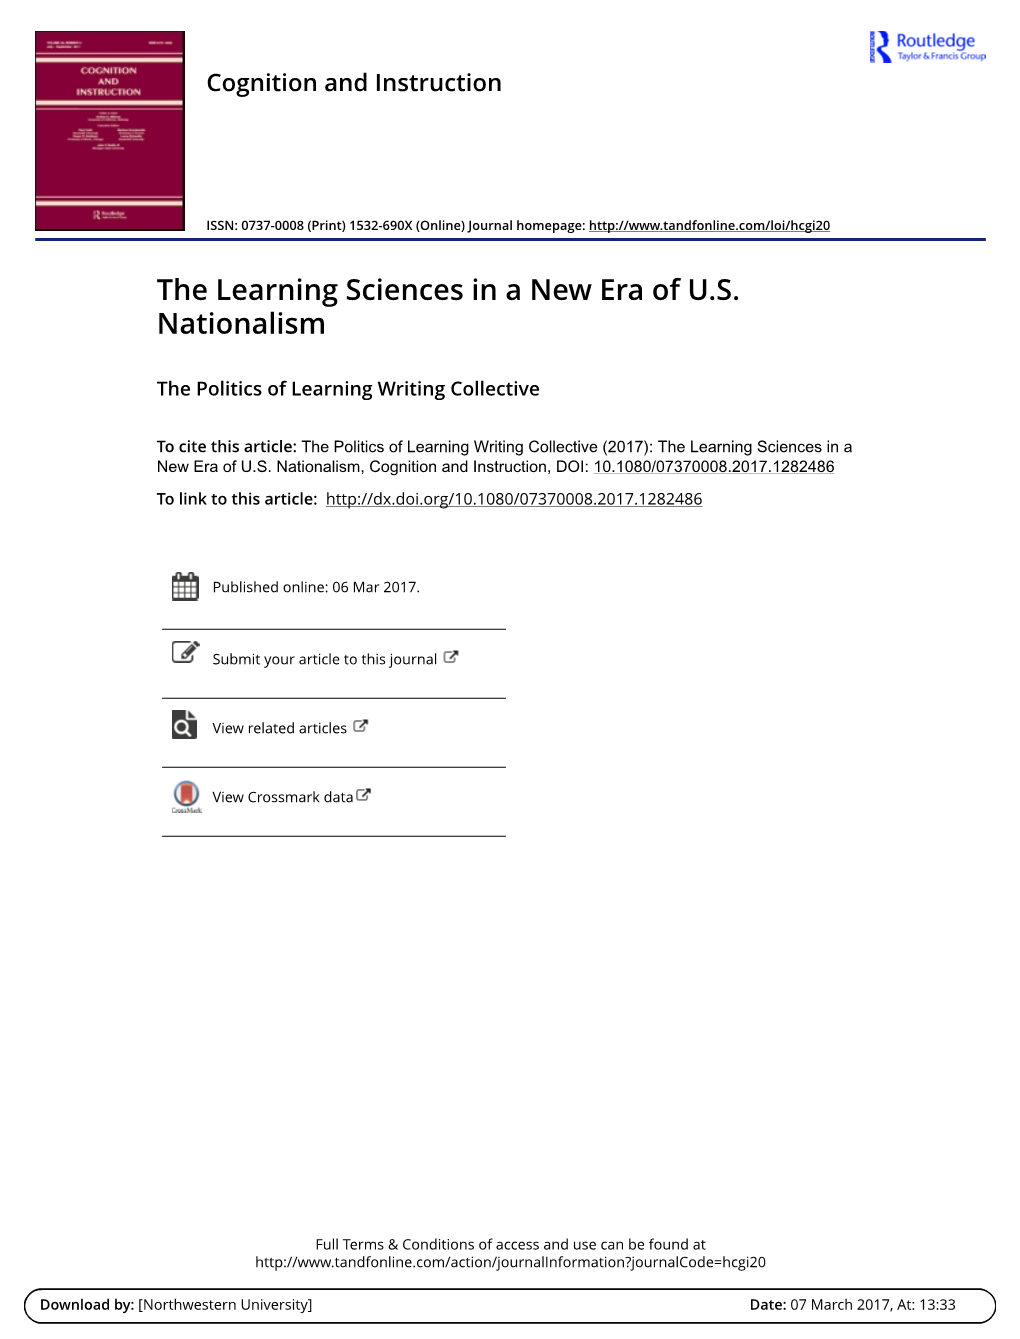 The Learning Sciences in a New Era of U.S. Nationalism